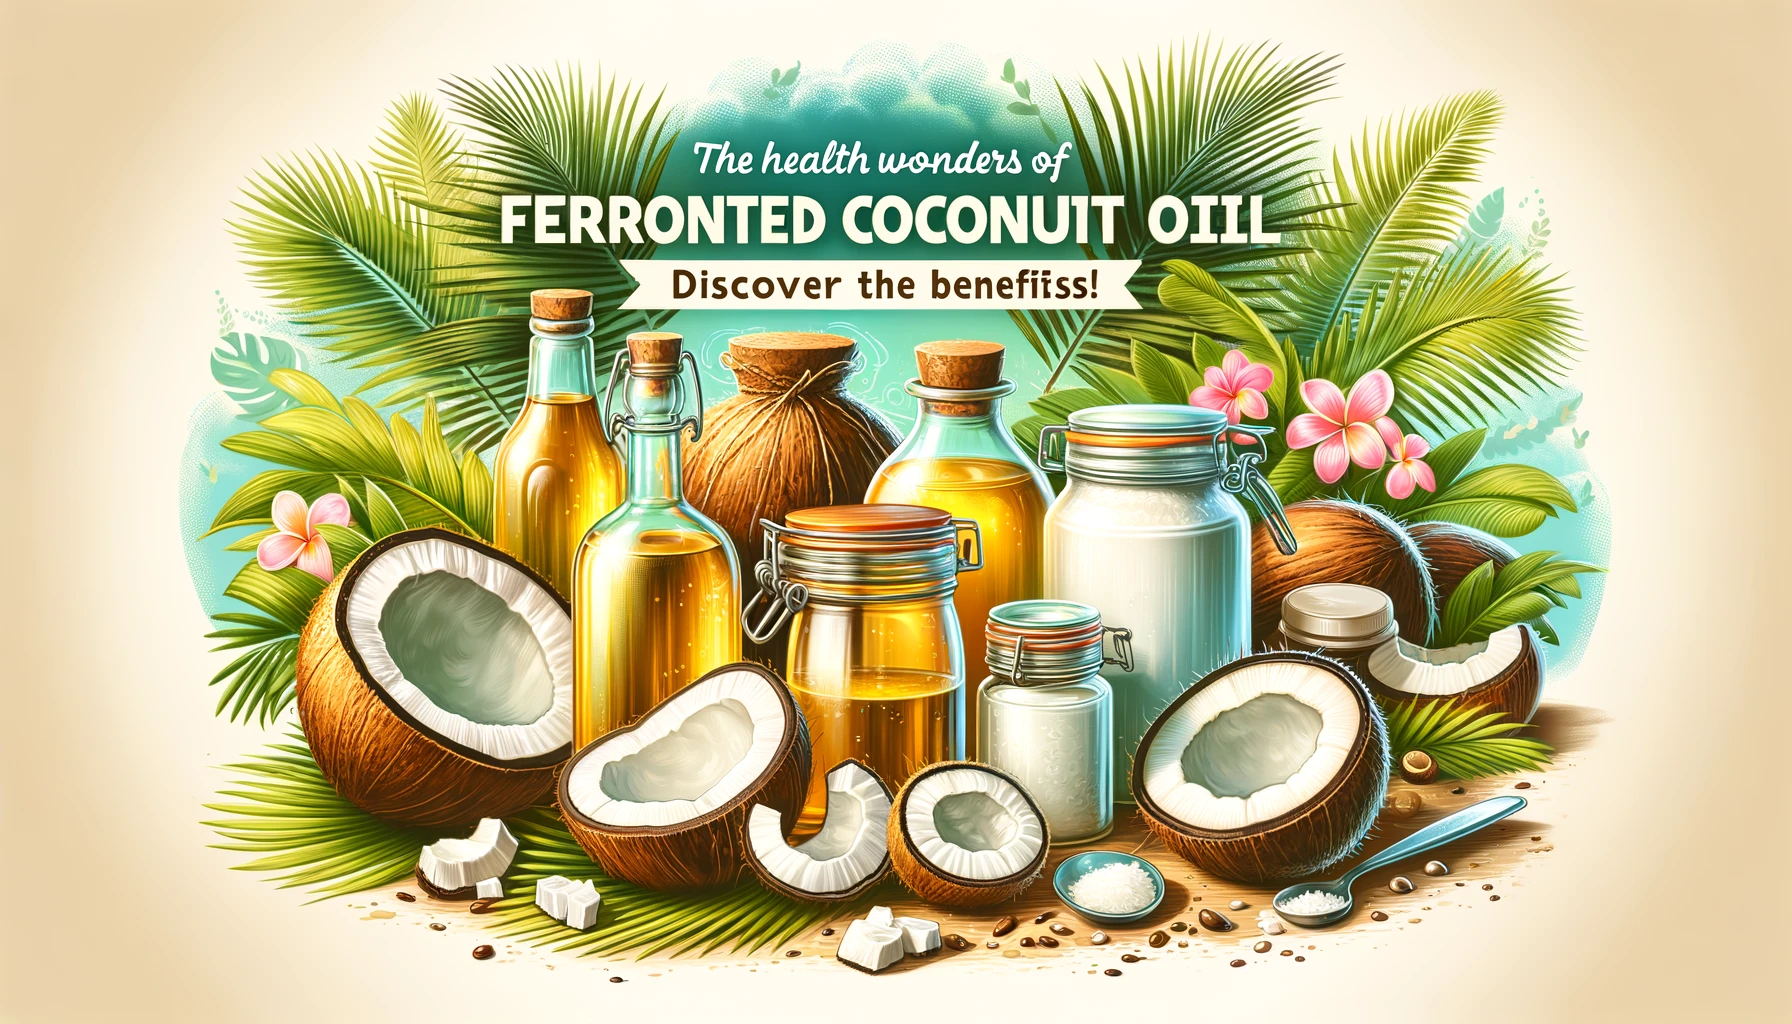 what happens to coconut oil in a fermenter